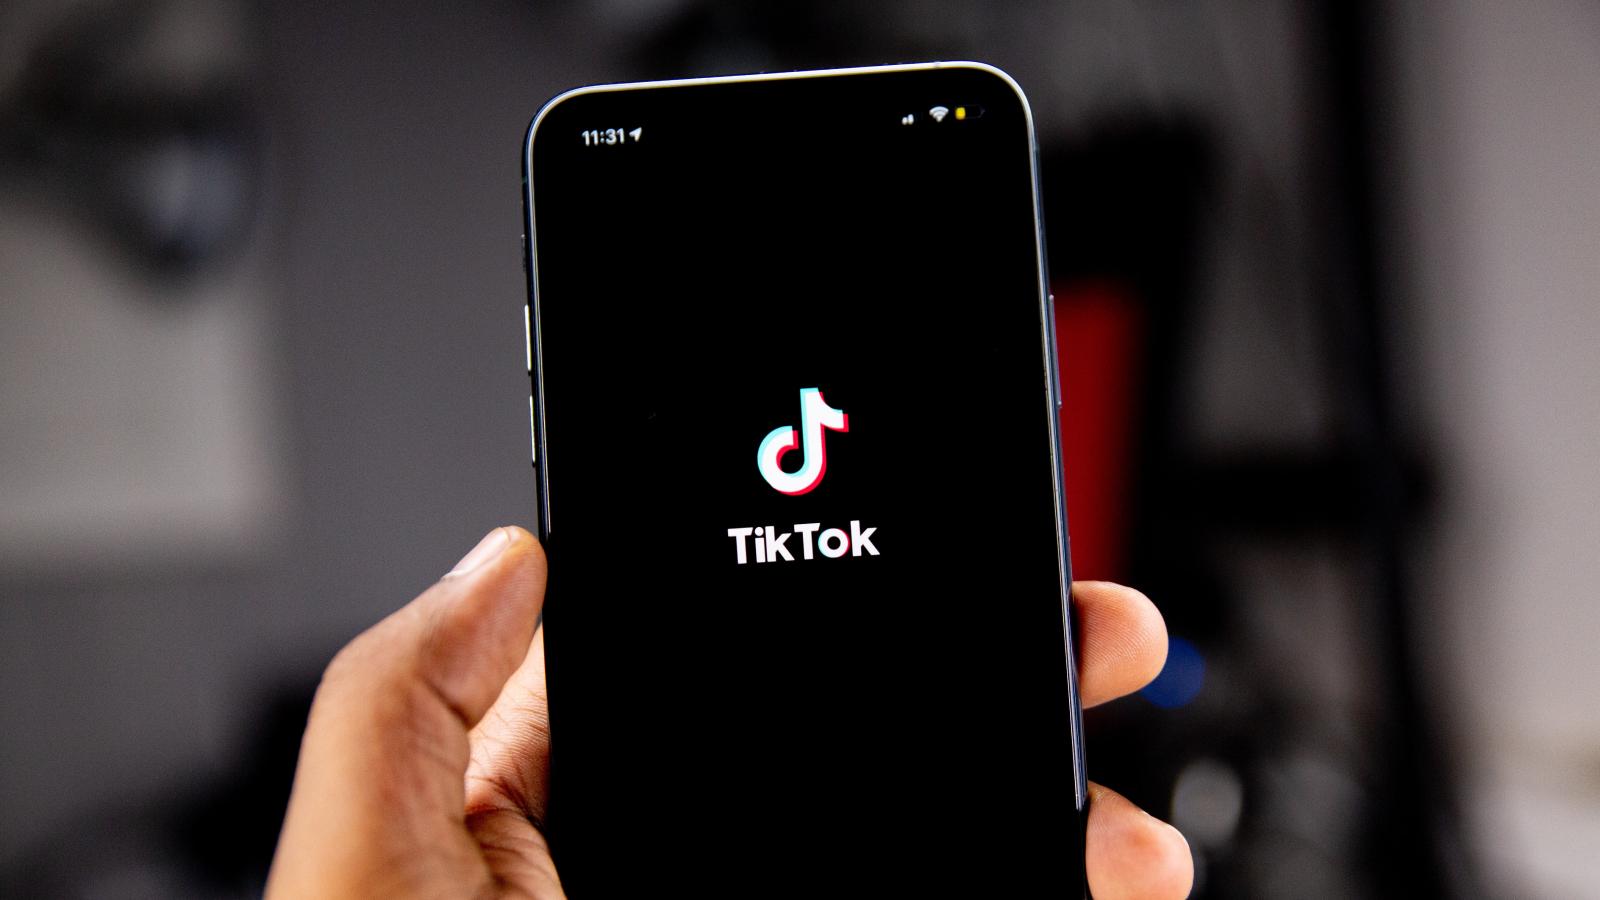 Person holding a phone with the TikTok logo on it.